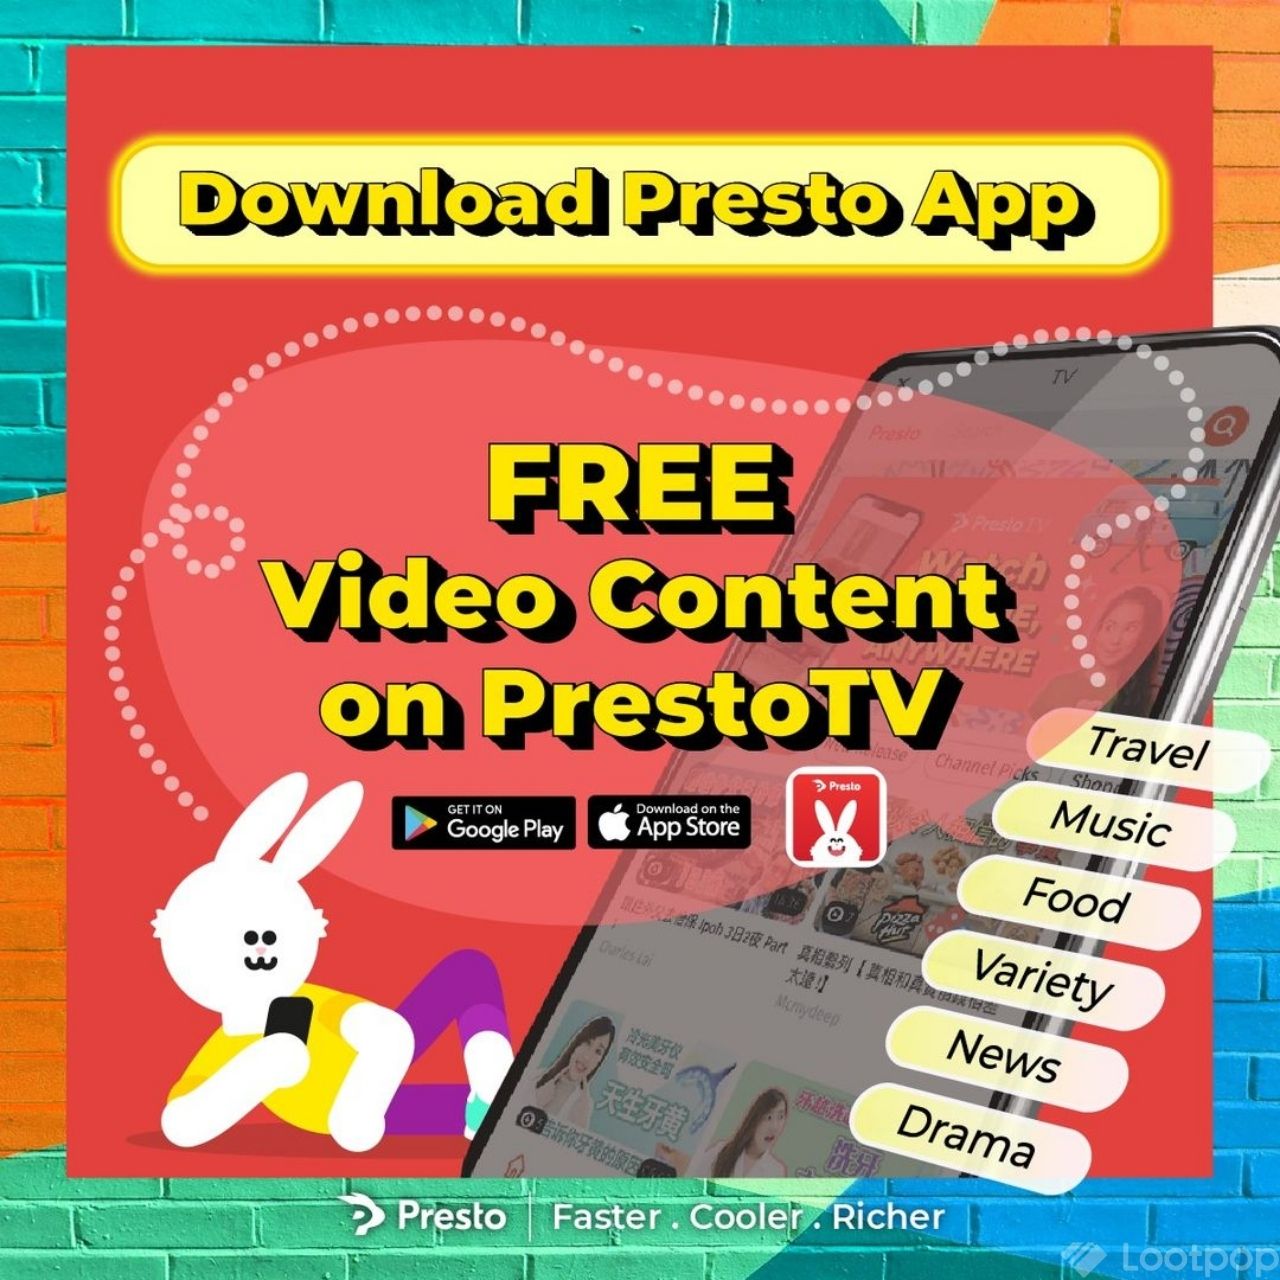 Watch Video Content for Free on PrestoTV